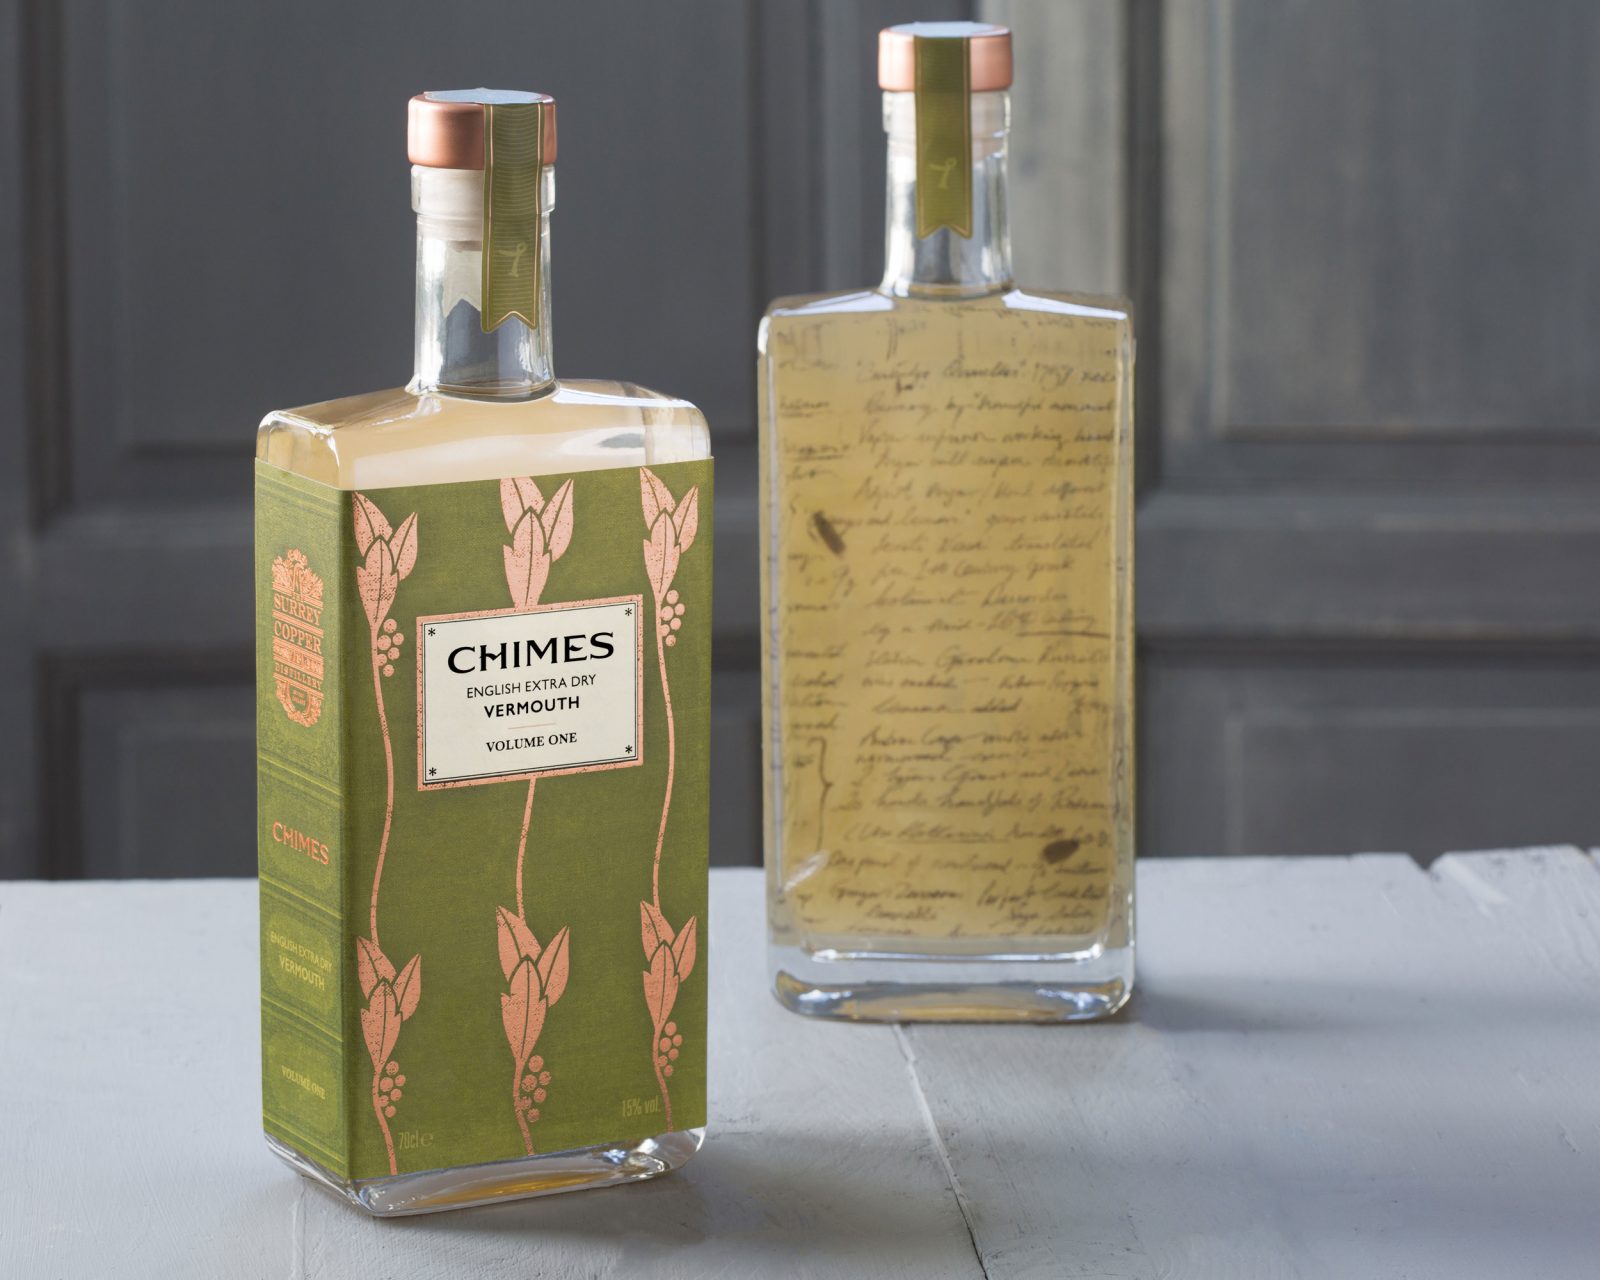 Brand Identity and Packaging Design for Chimes Vermouth from The Surrey Copper Distillery